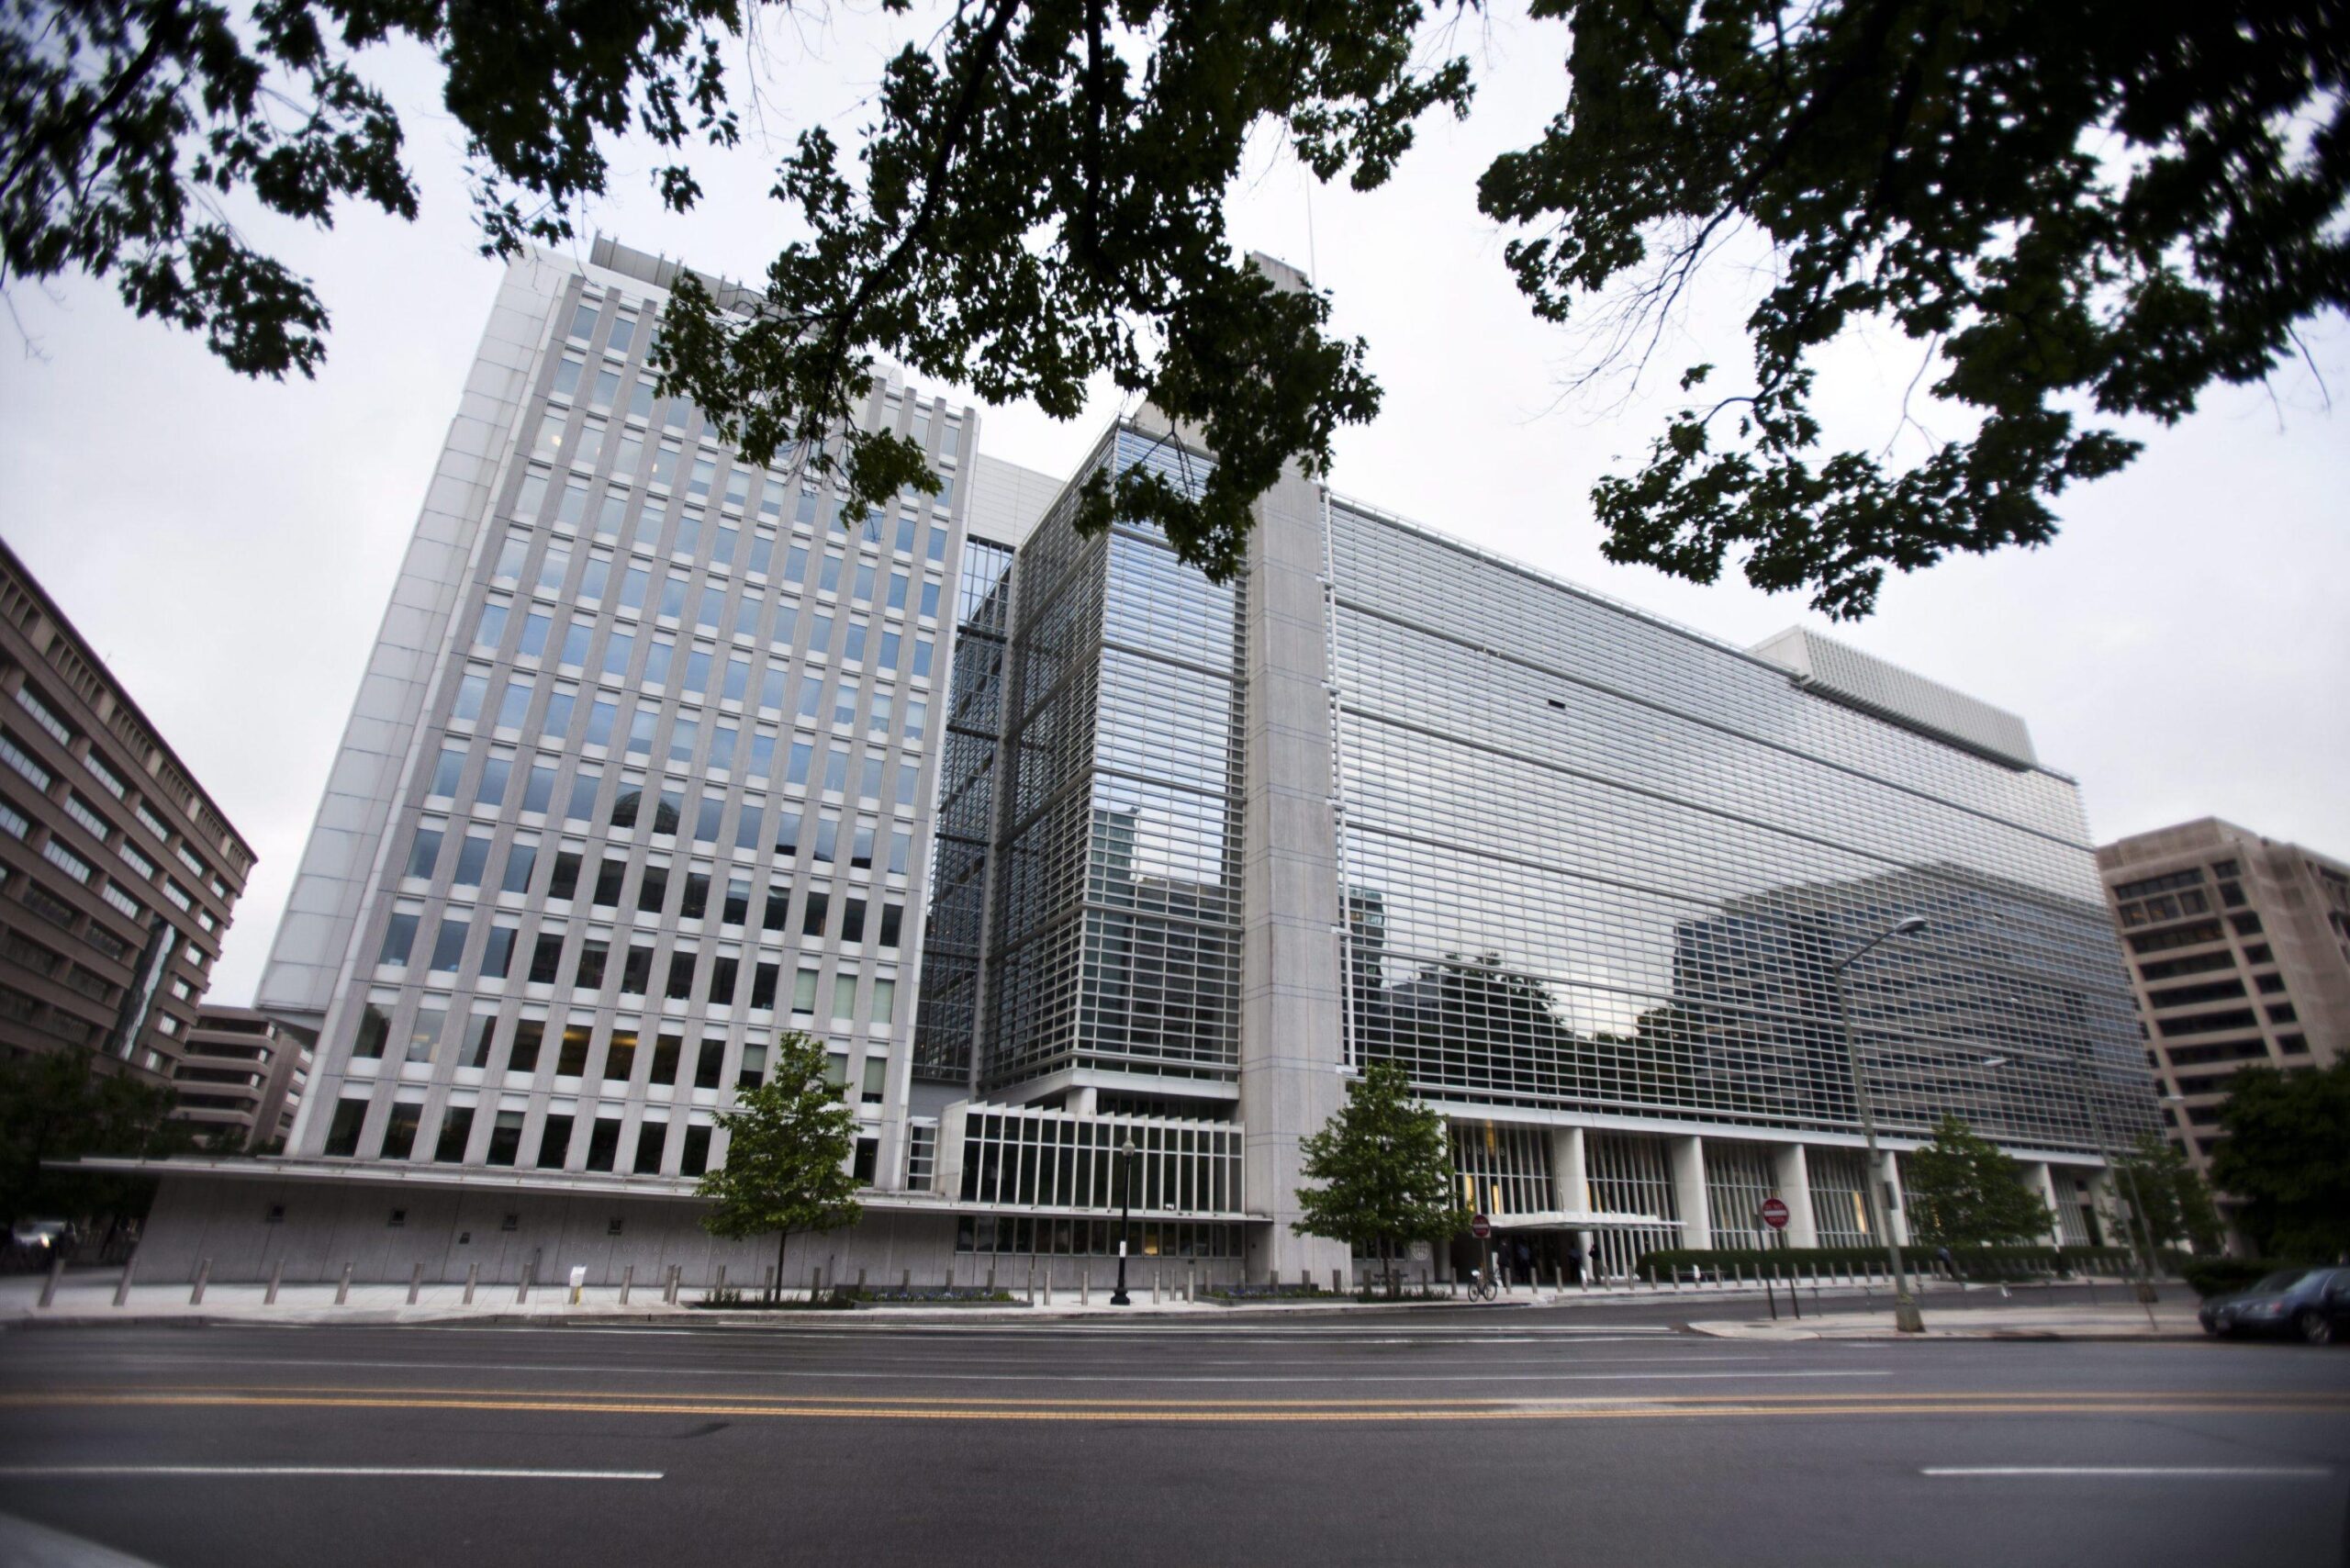 An exterior view of the Headquarters of the World Bank in Washington, DC, USA, on 18 May, 2011. ANSA/JIM LO SCALZO